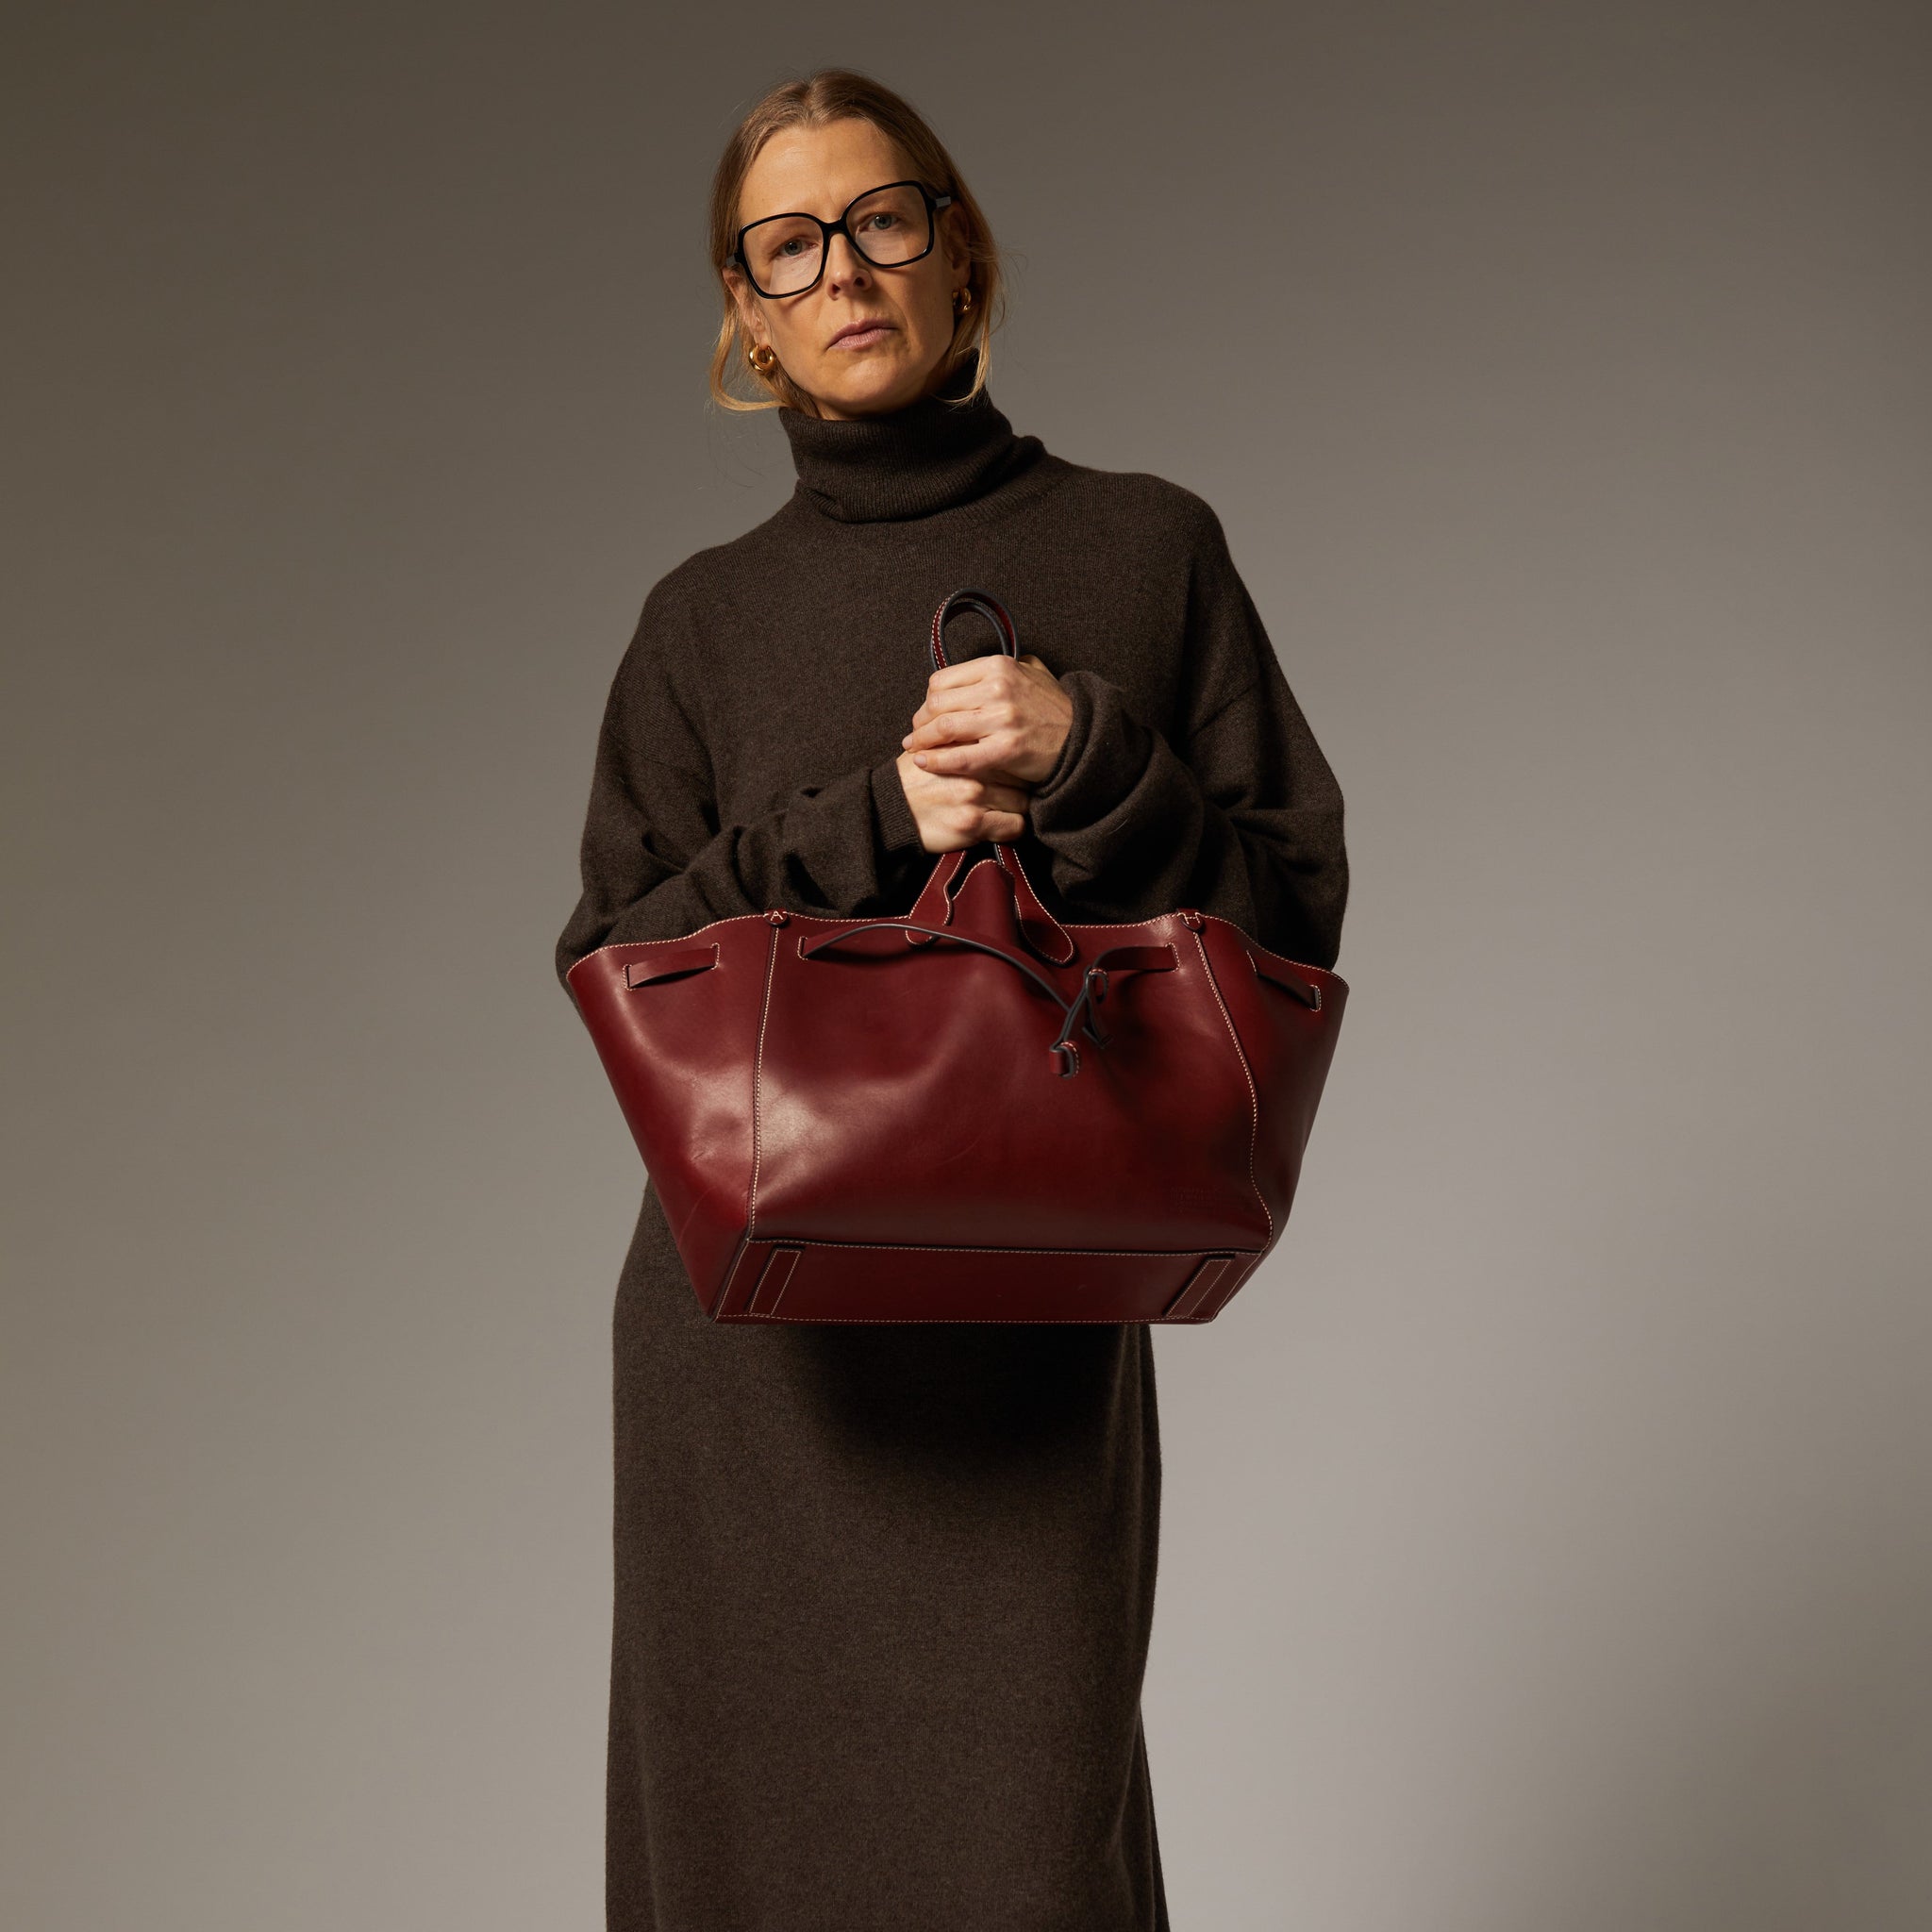 Return to Nature Tote -

                  
                    Compostable Leather in Rosewood -
                  

                  Anya Hindmarch US
